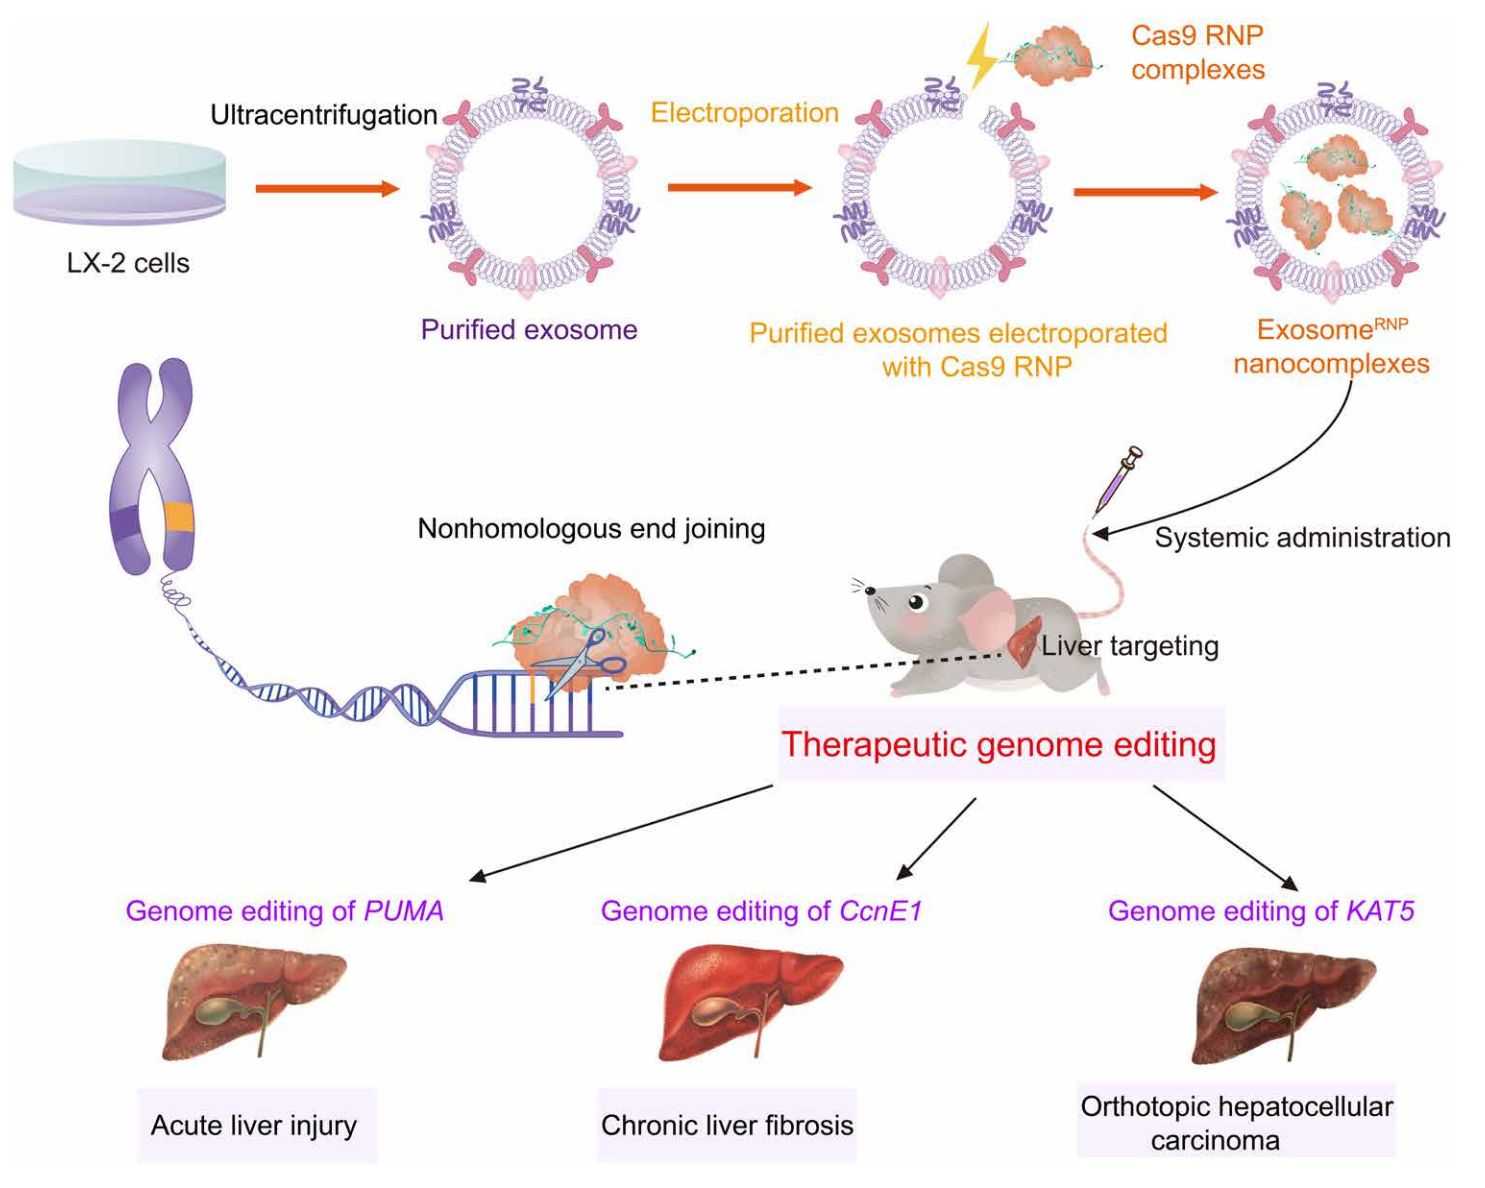 Figure 4. Exosome delivery of Cas9 RNP for the treatment of liver disease.